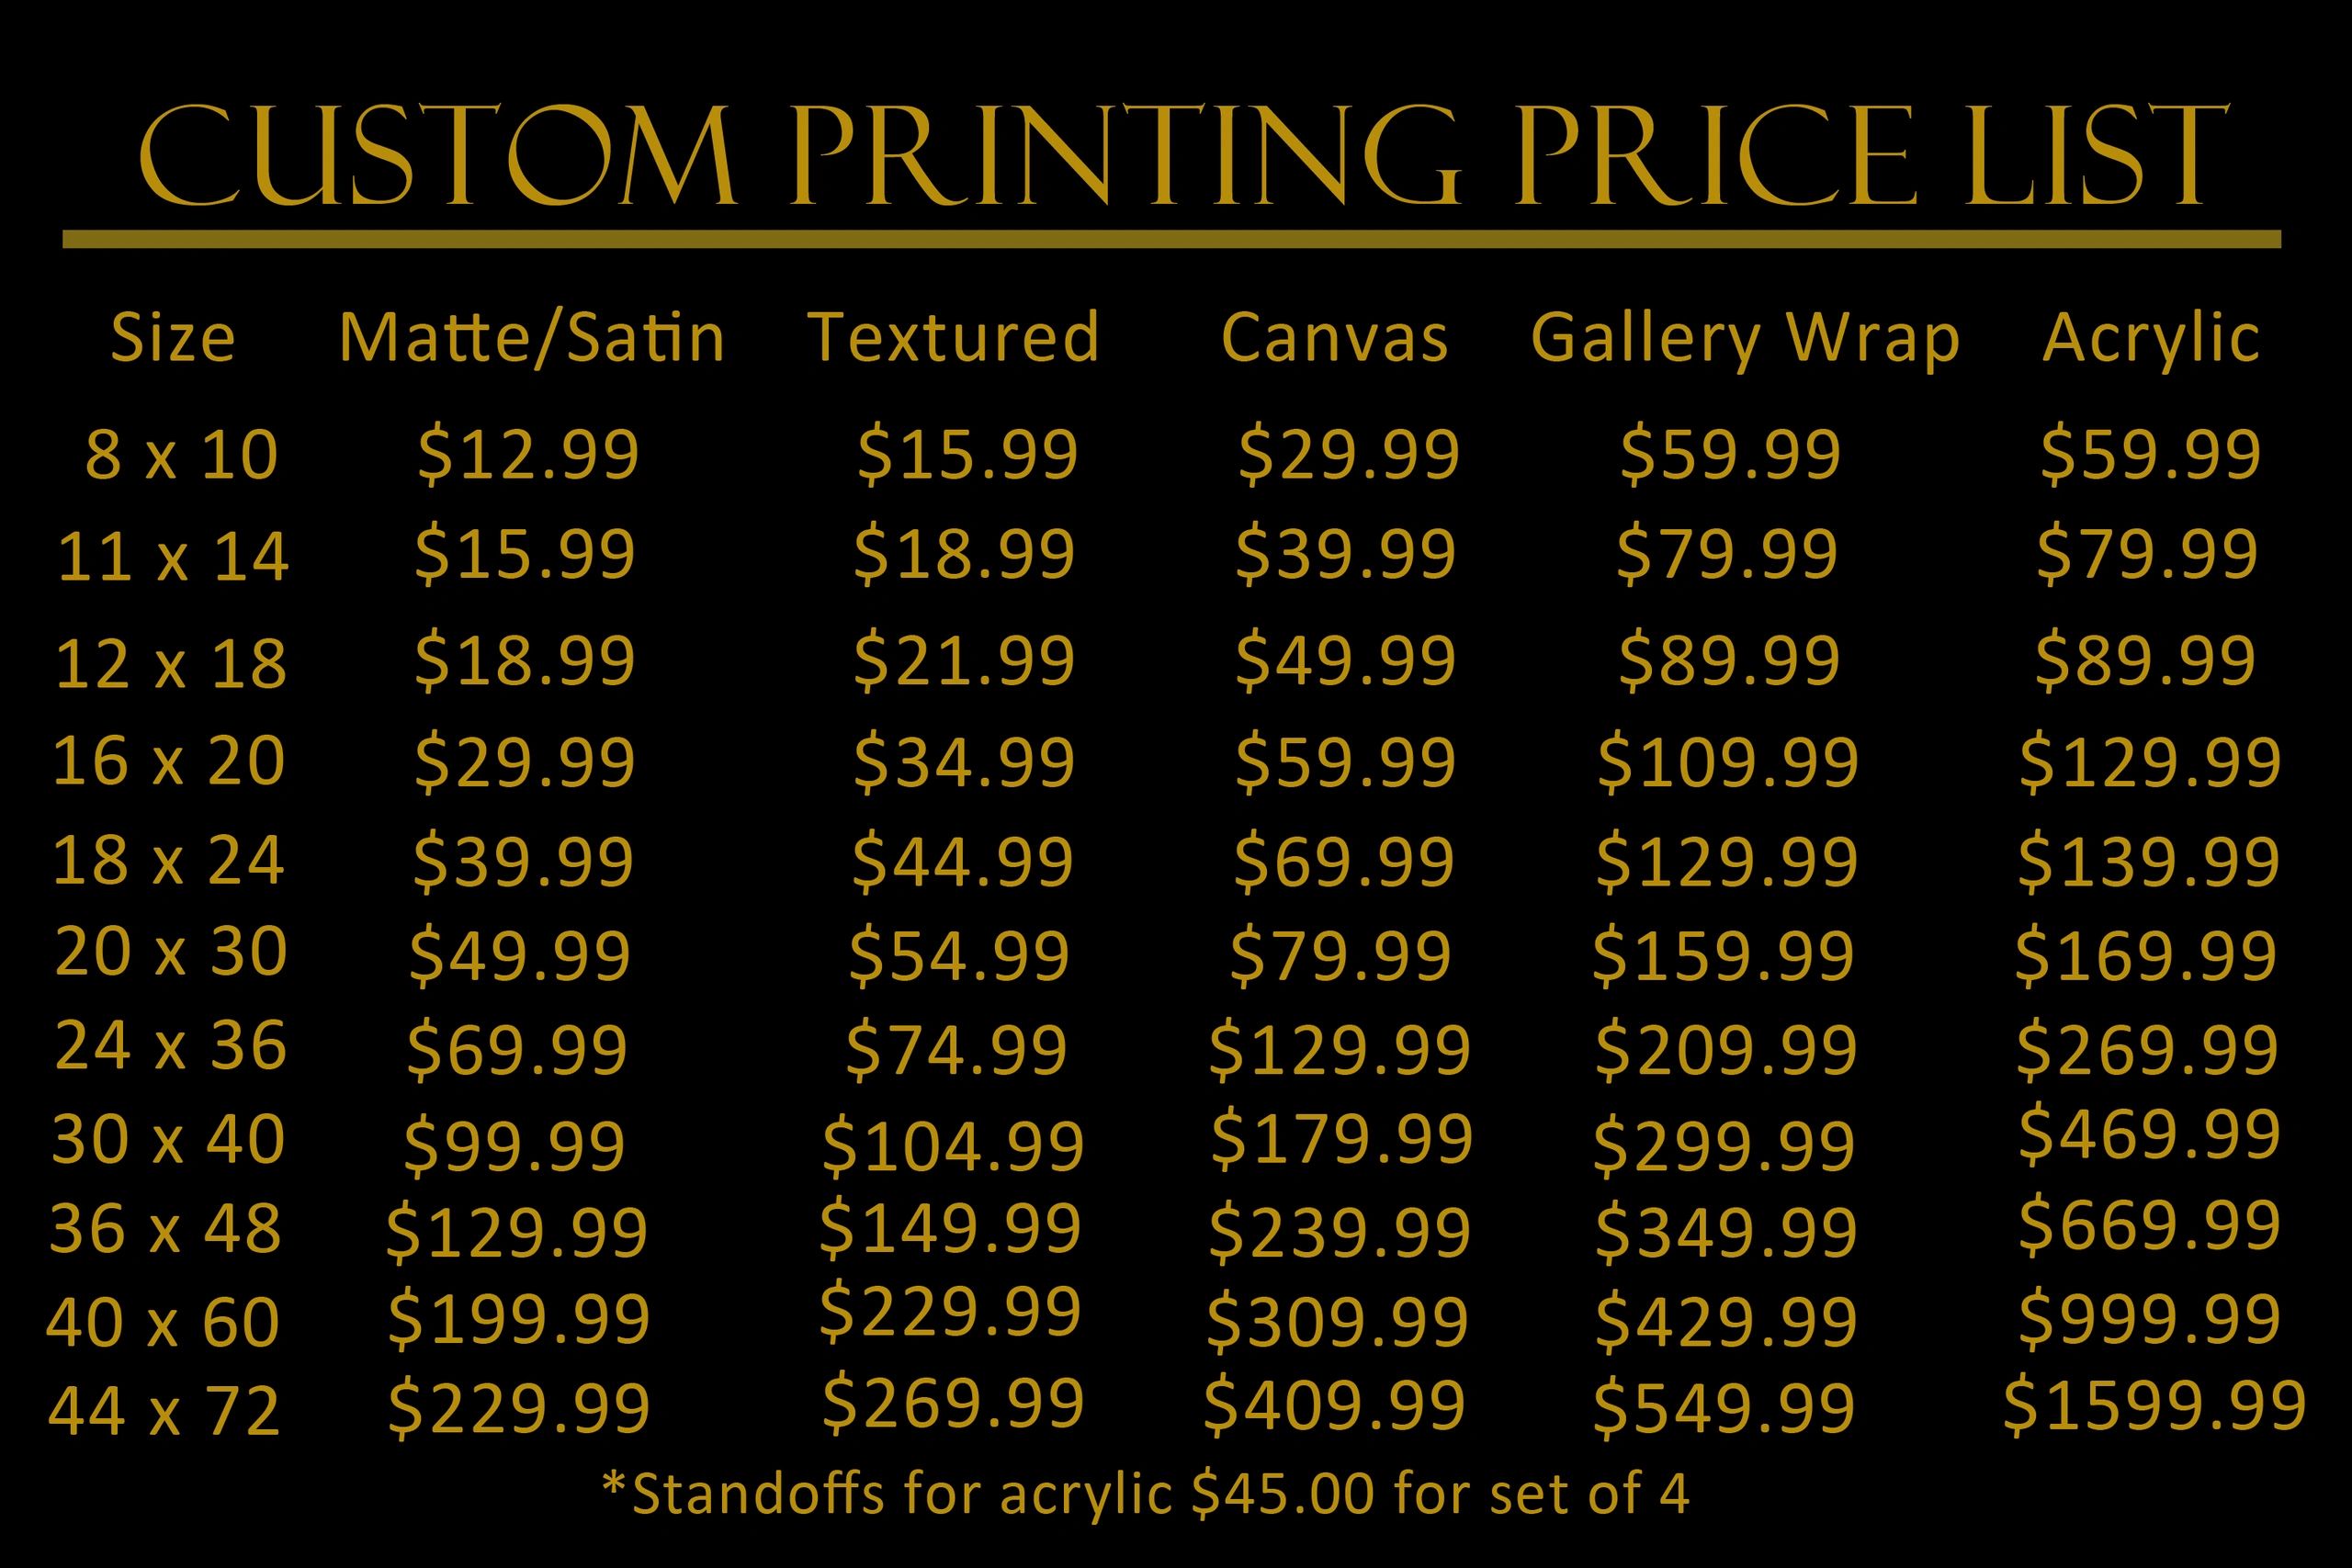 Does ArtisanHD Have A Standard List Of Photo Printing Prices?